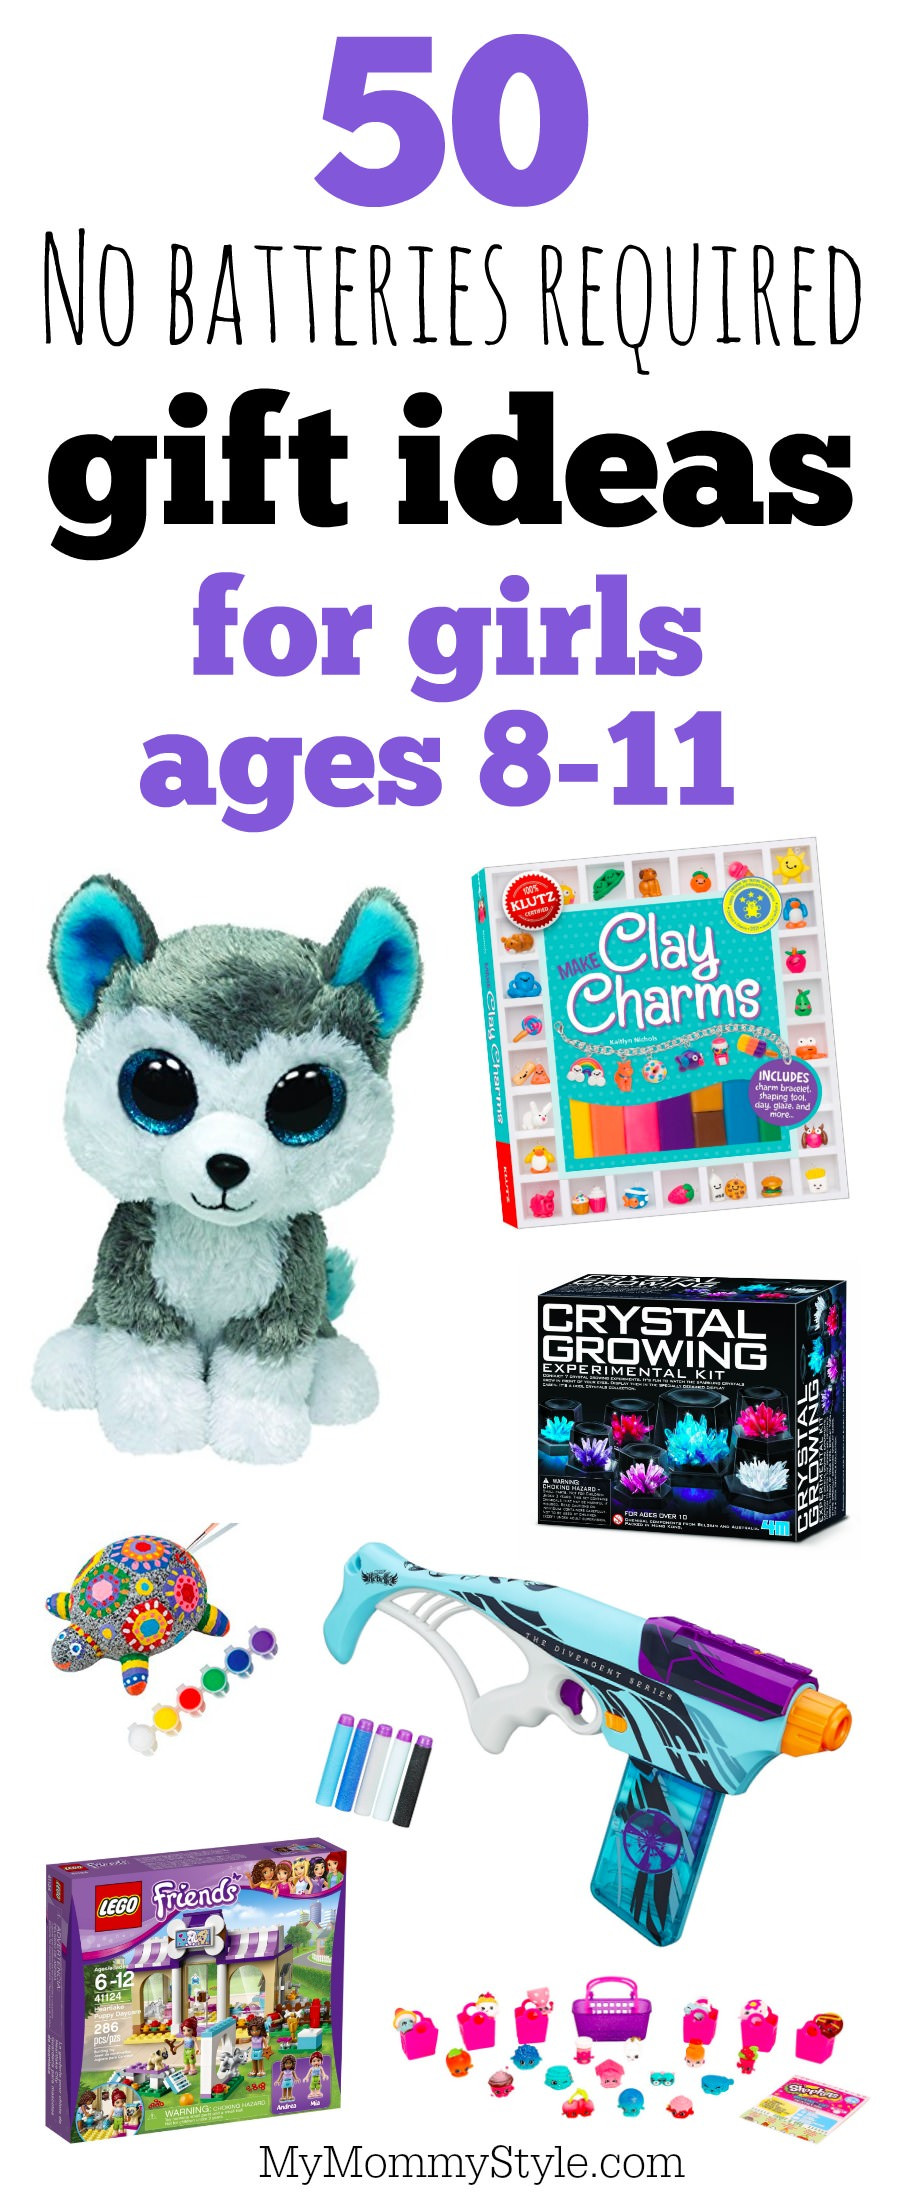 Girls Age 8 Gift Ideas
 No batteries required t ideas for girls ages 8 11 My